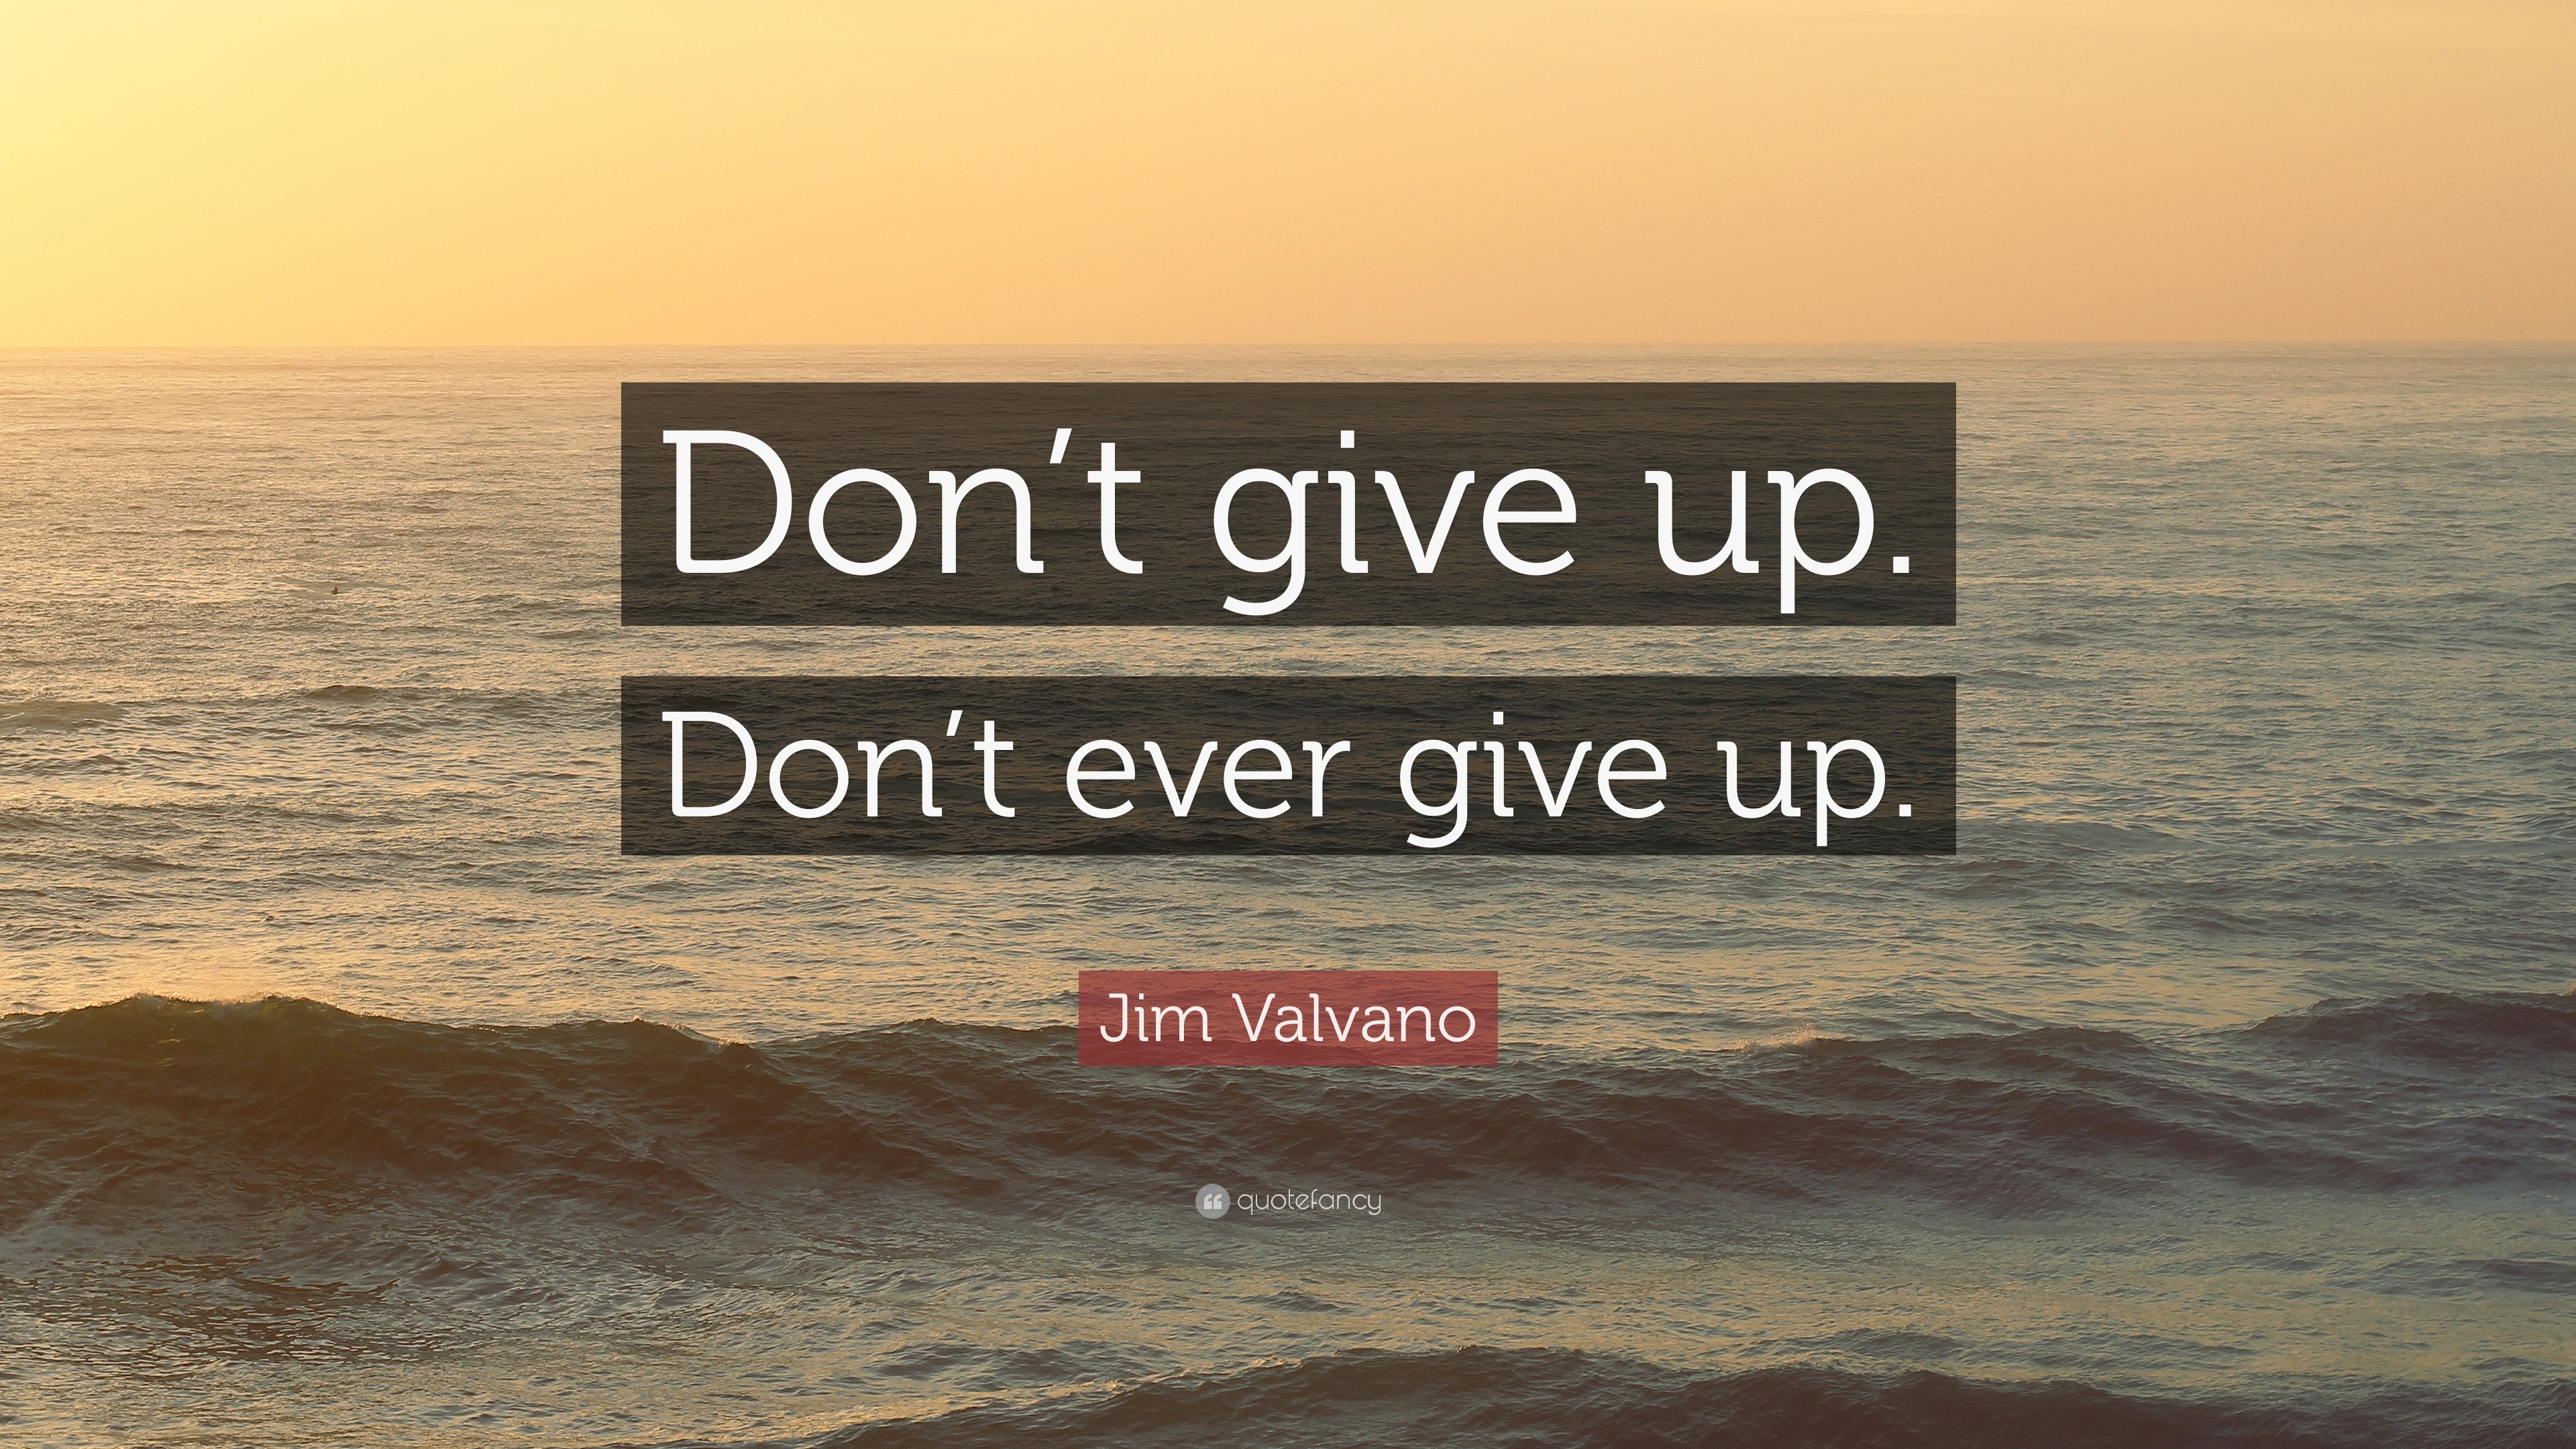 Jim Valvano Quote: “Don’t give up. Don’t ever give up.”